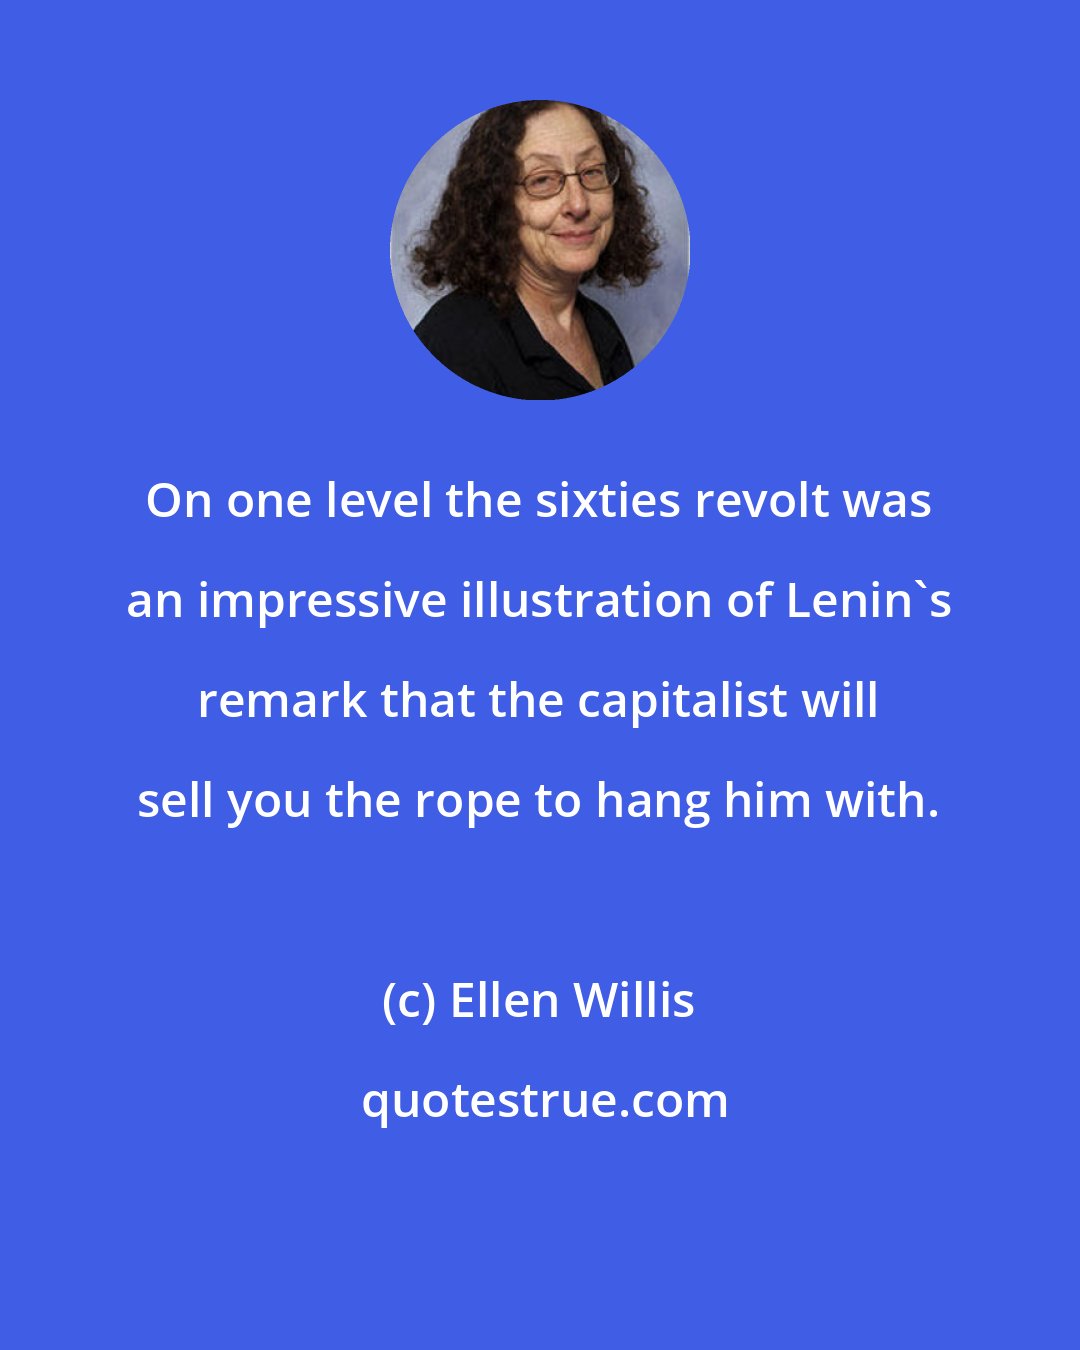 Ellen Willis: On one level the sixties revolt was an impressive illustration of Lenin's remark that the capitalist will sell you the rope to hang him with.